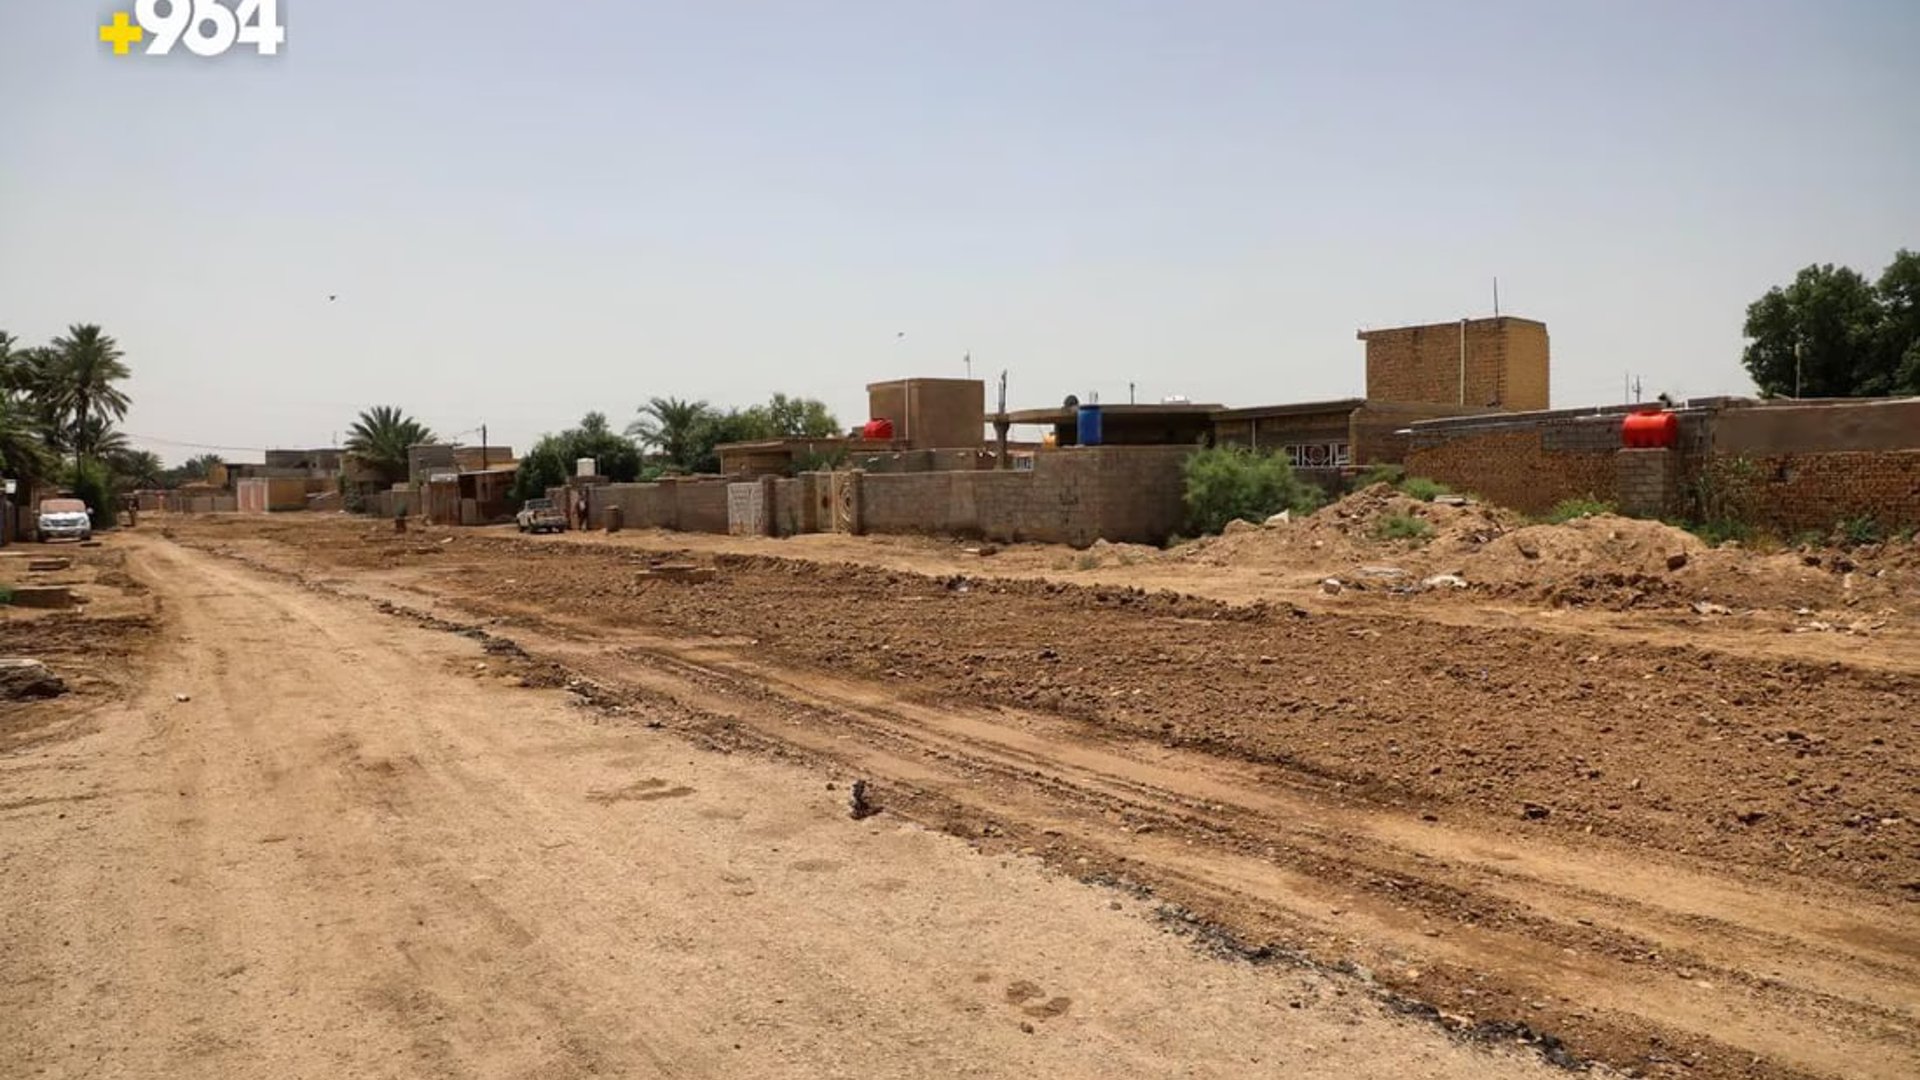 Residents in Kut fear evictions aming campaign to eliminate illegal housing